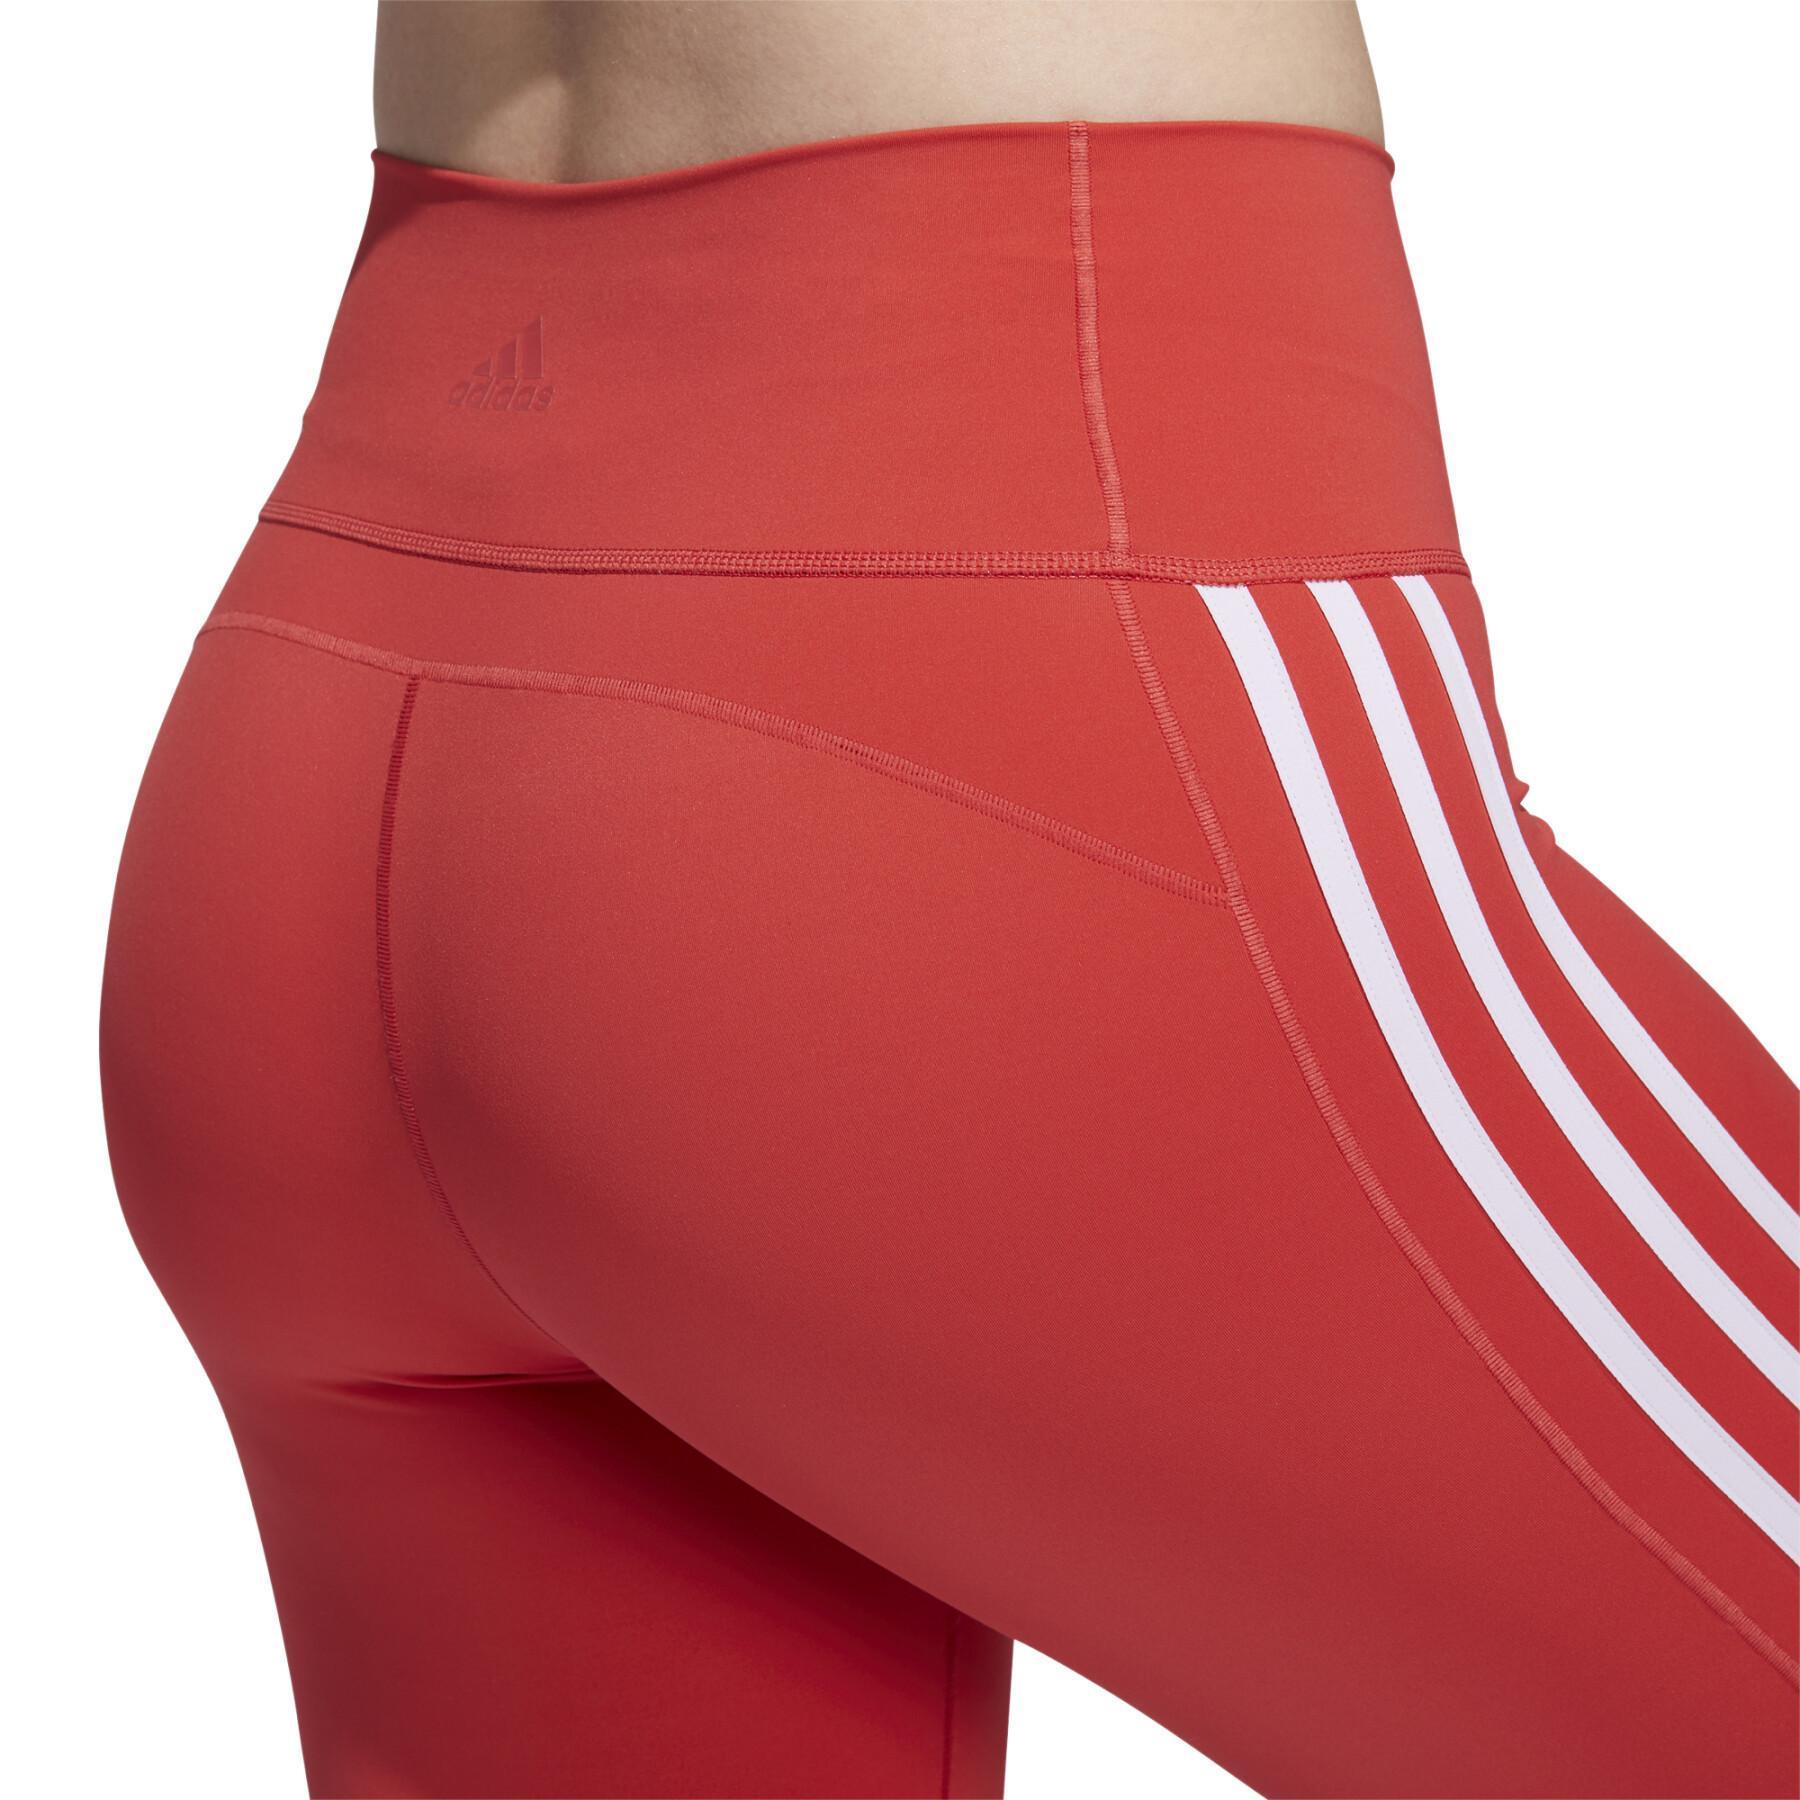 Women's tights adidas Believe This 3-Stripes